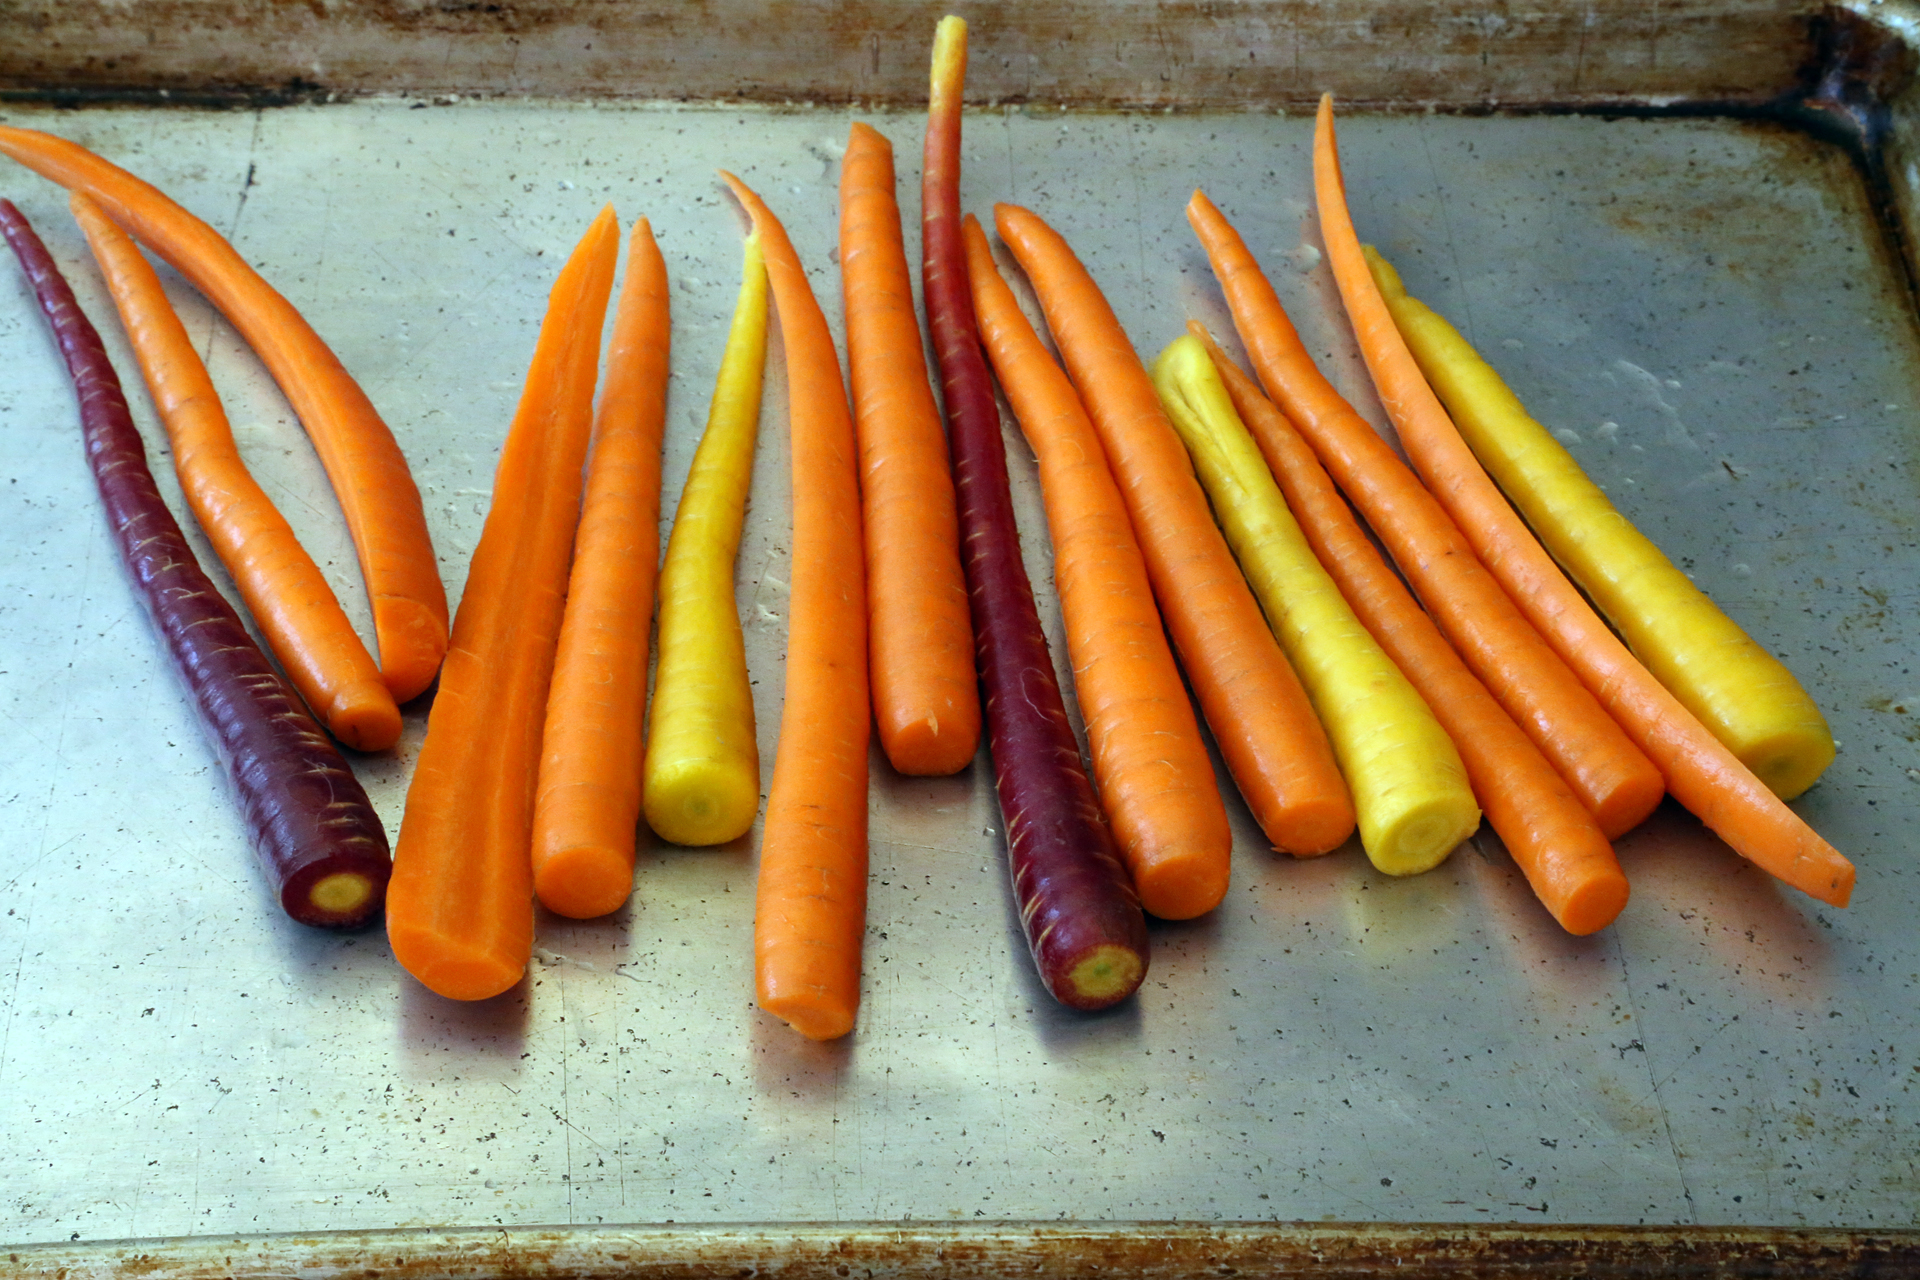 Heirloom carrots in a variety of colors.